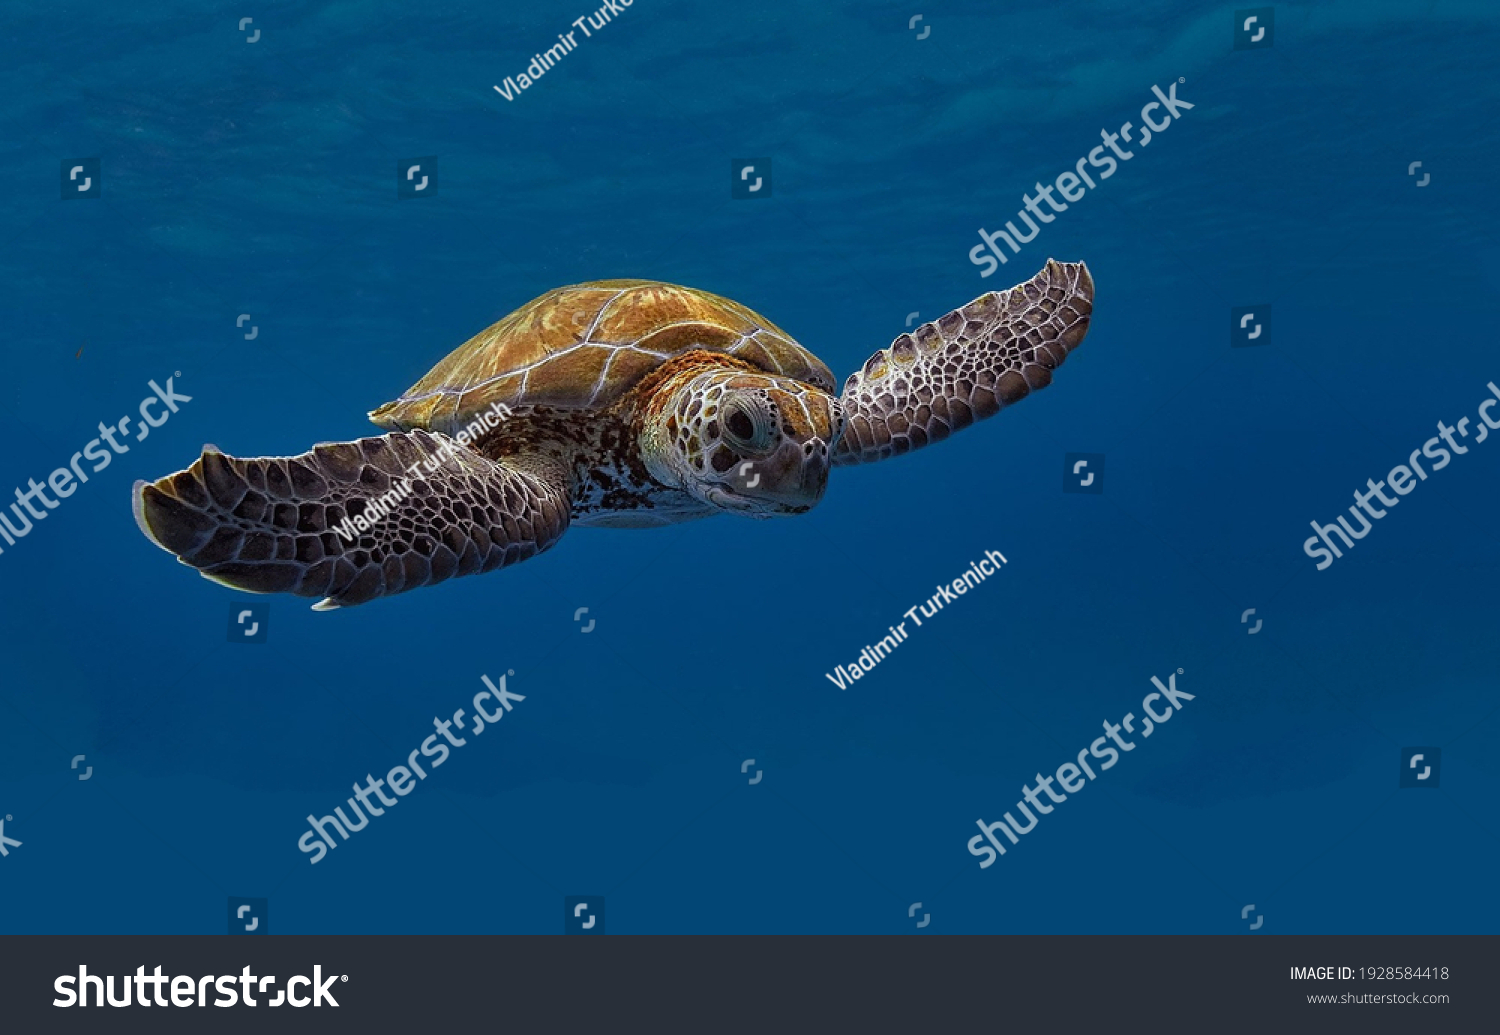 A magnificent giant golden sea turtle spreads its paws and swims in the blue depths of the sea #1928584418